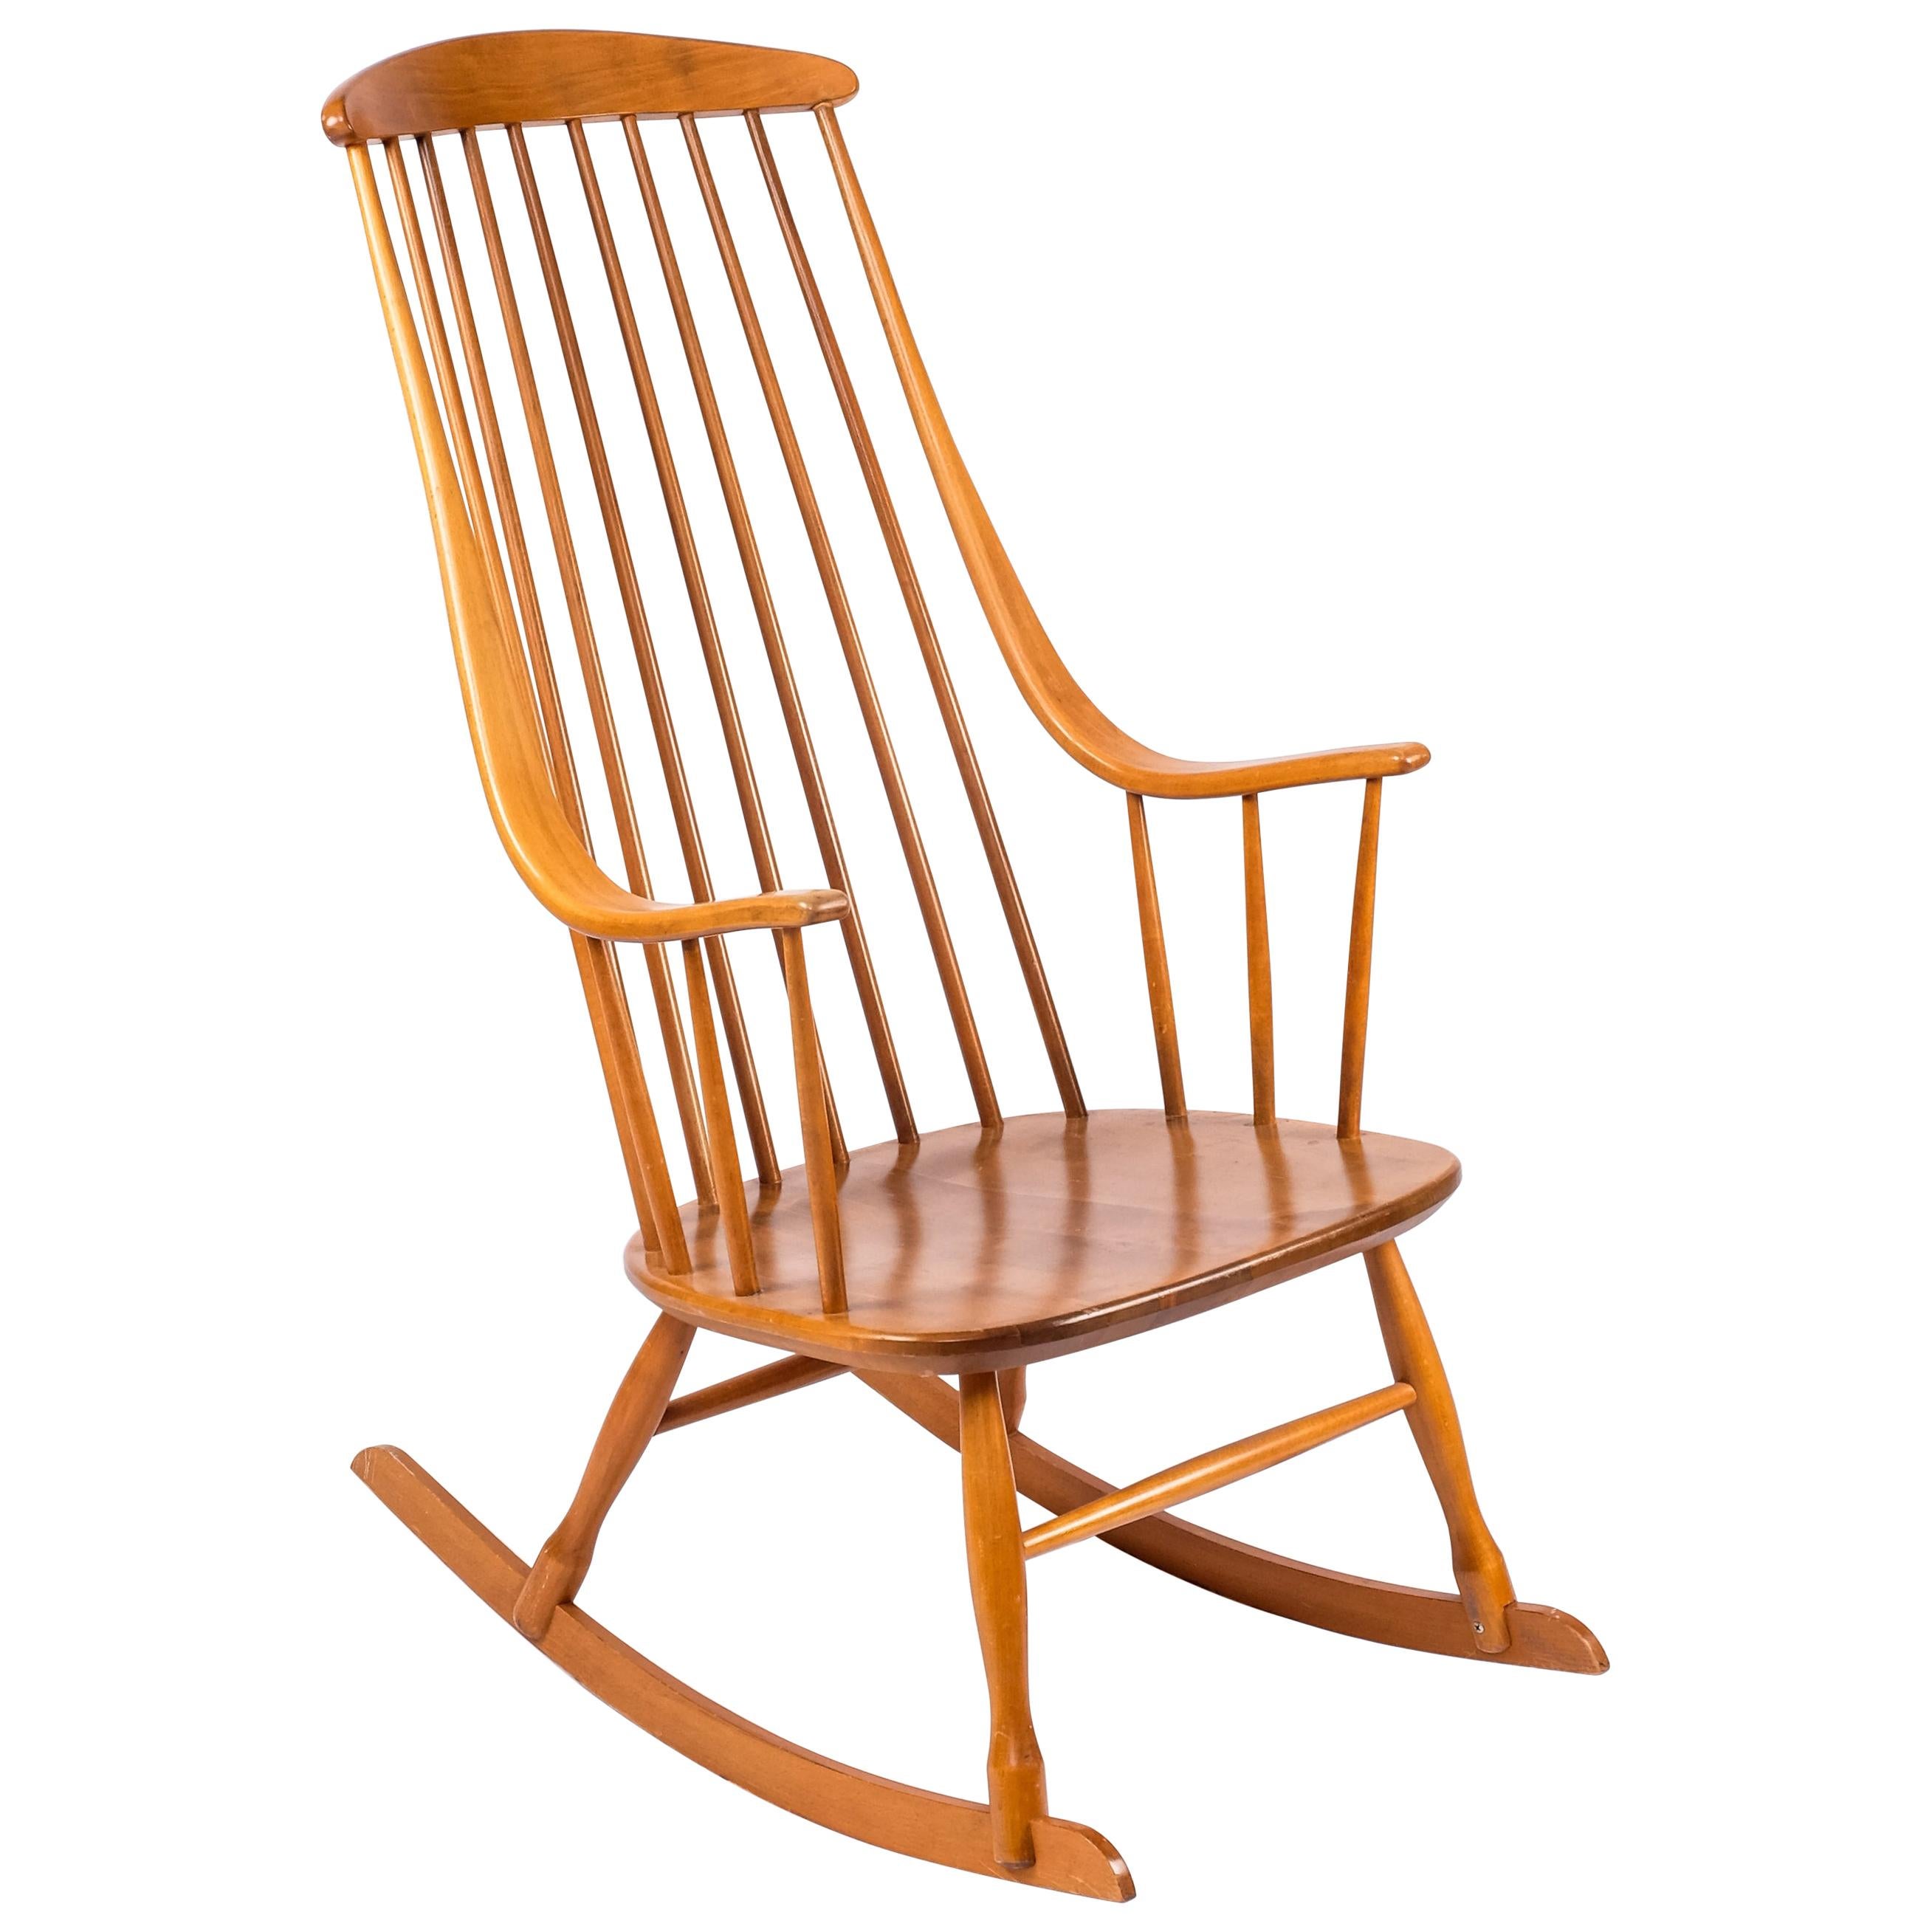 "Grandessa" Rocking Chair by Lena Larsson, Sweden, 1950s